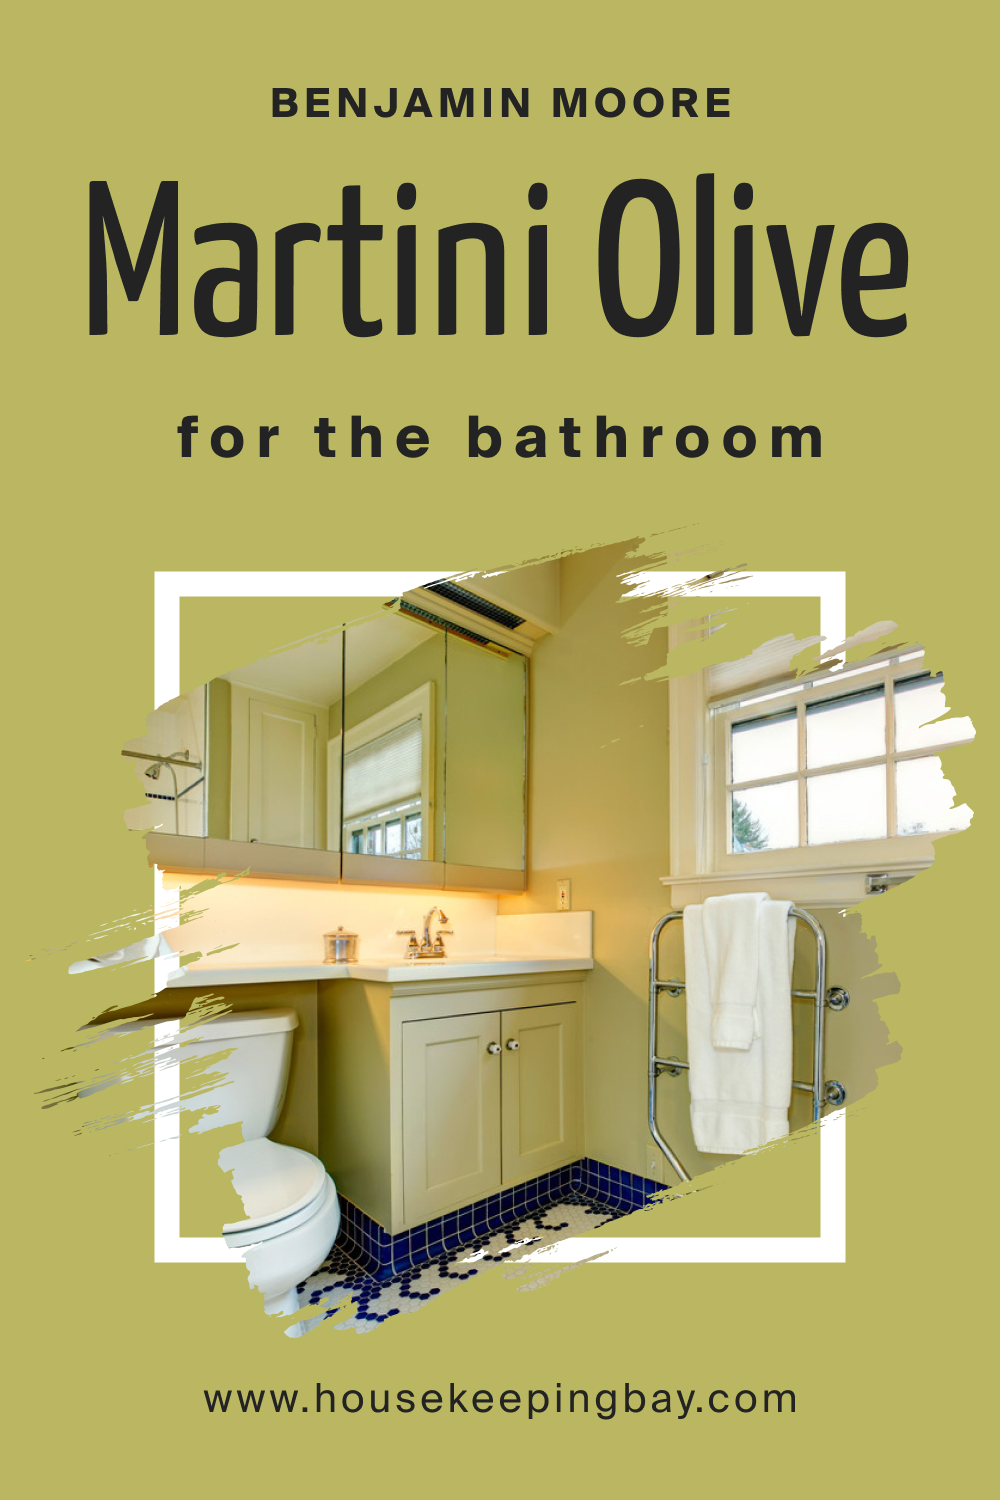 How to Use Martini Olive CSP-890 in the Bathroom?